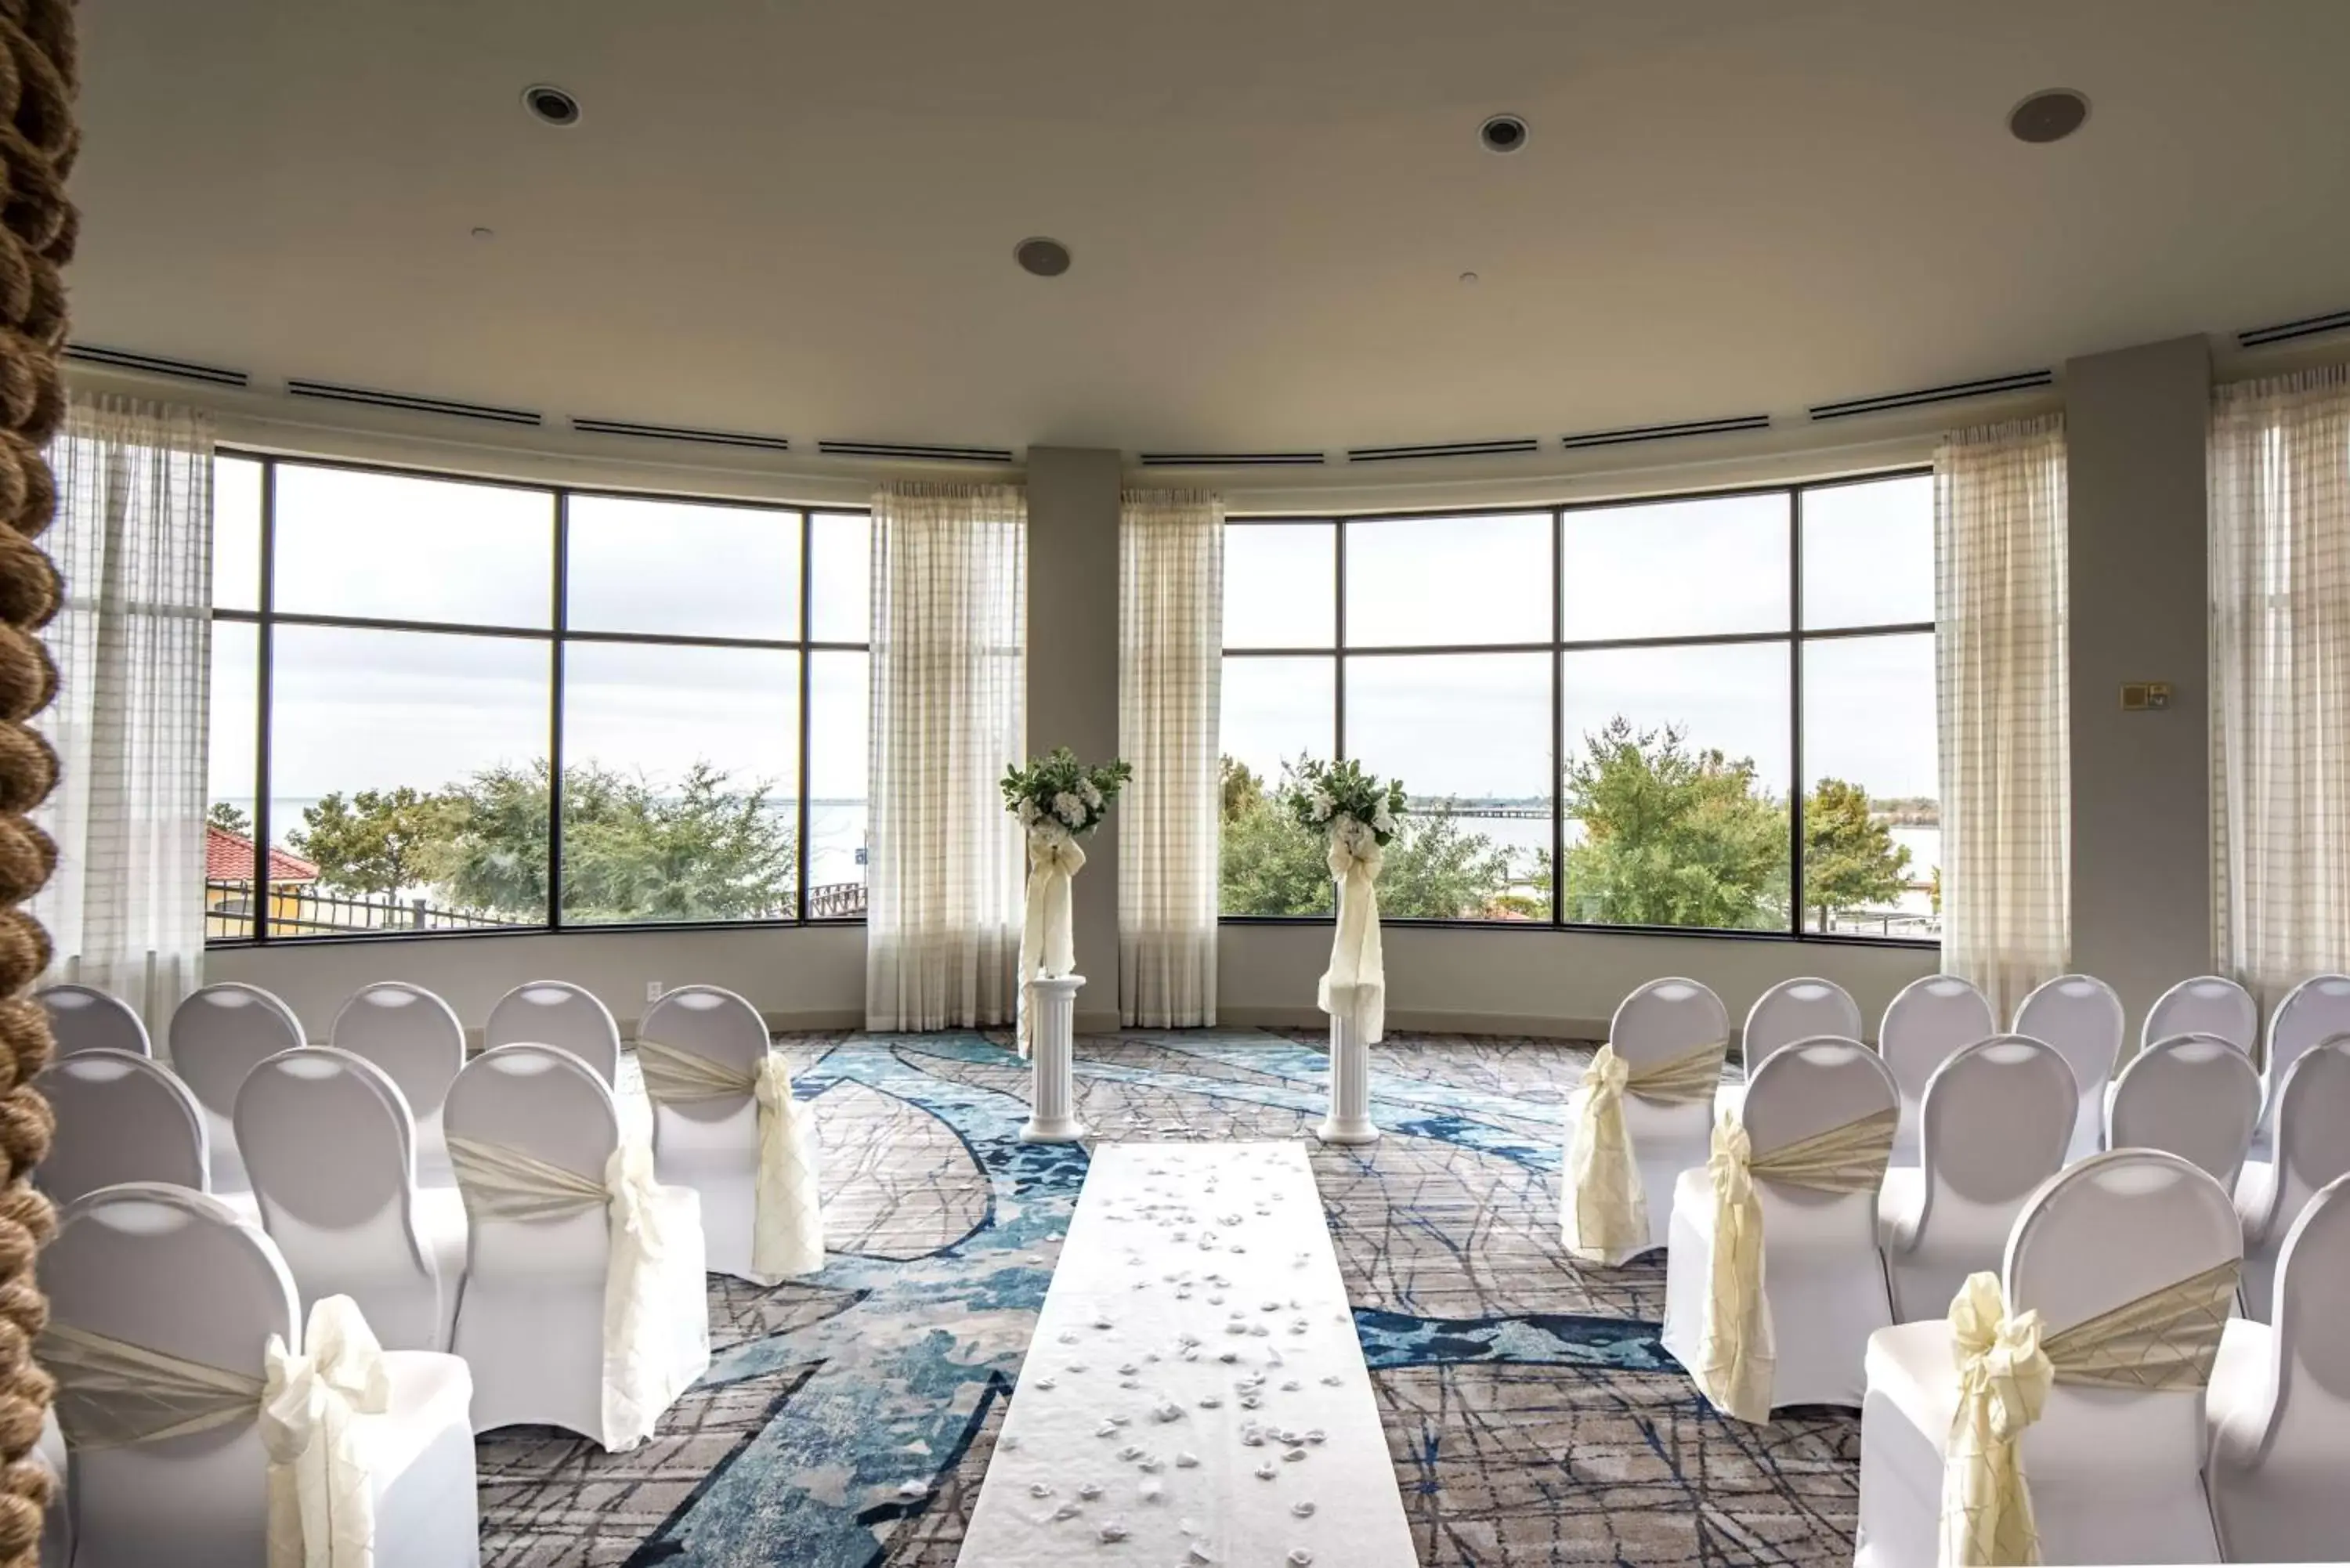 Meeting/conference room, Banquet Facilities in Hilton Dallas/Rockwall Lakefront Hotel